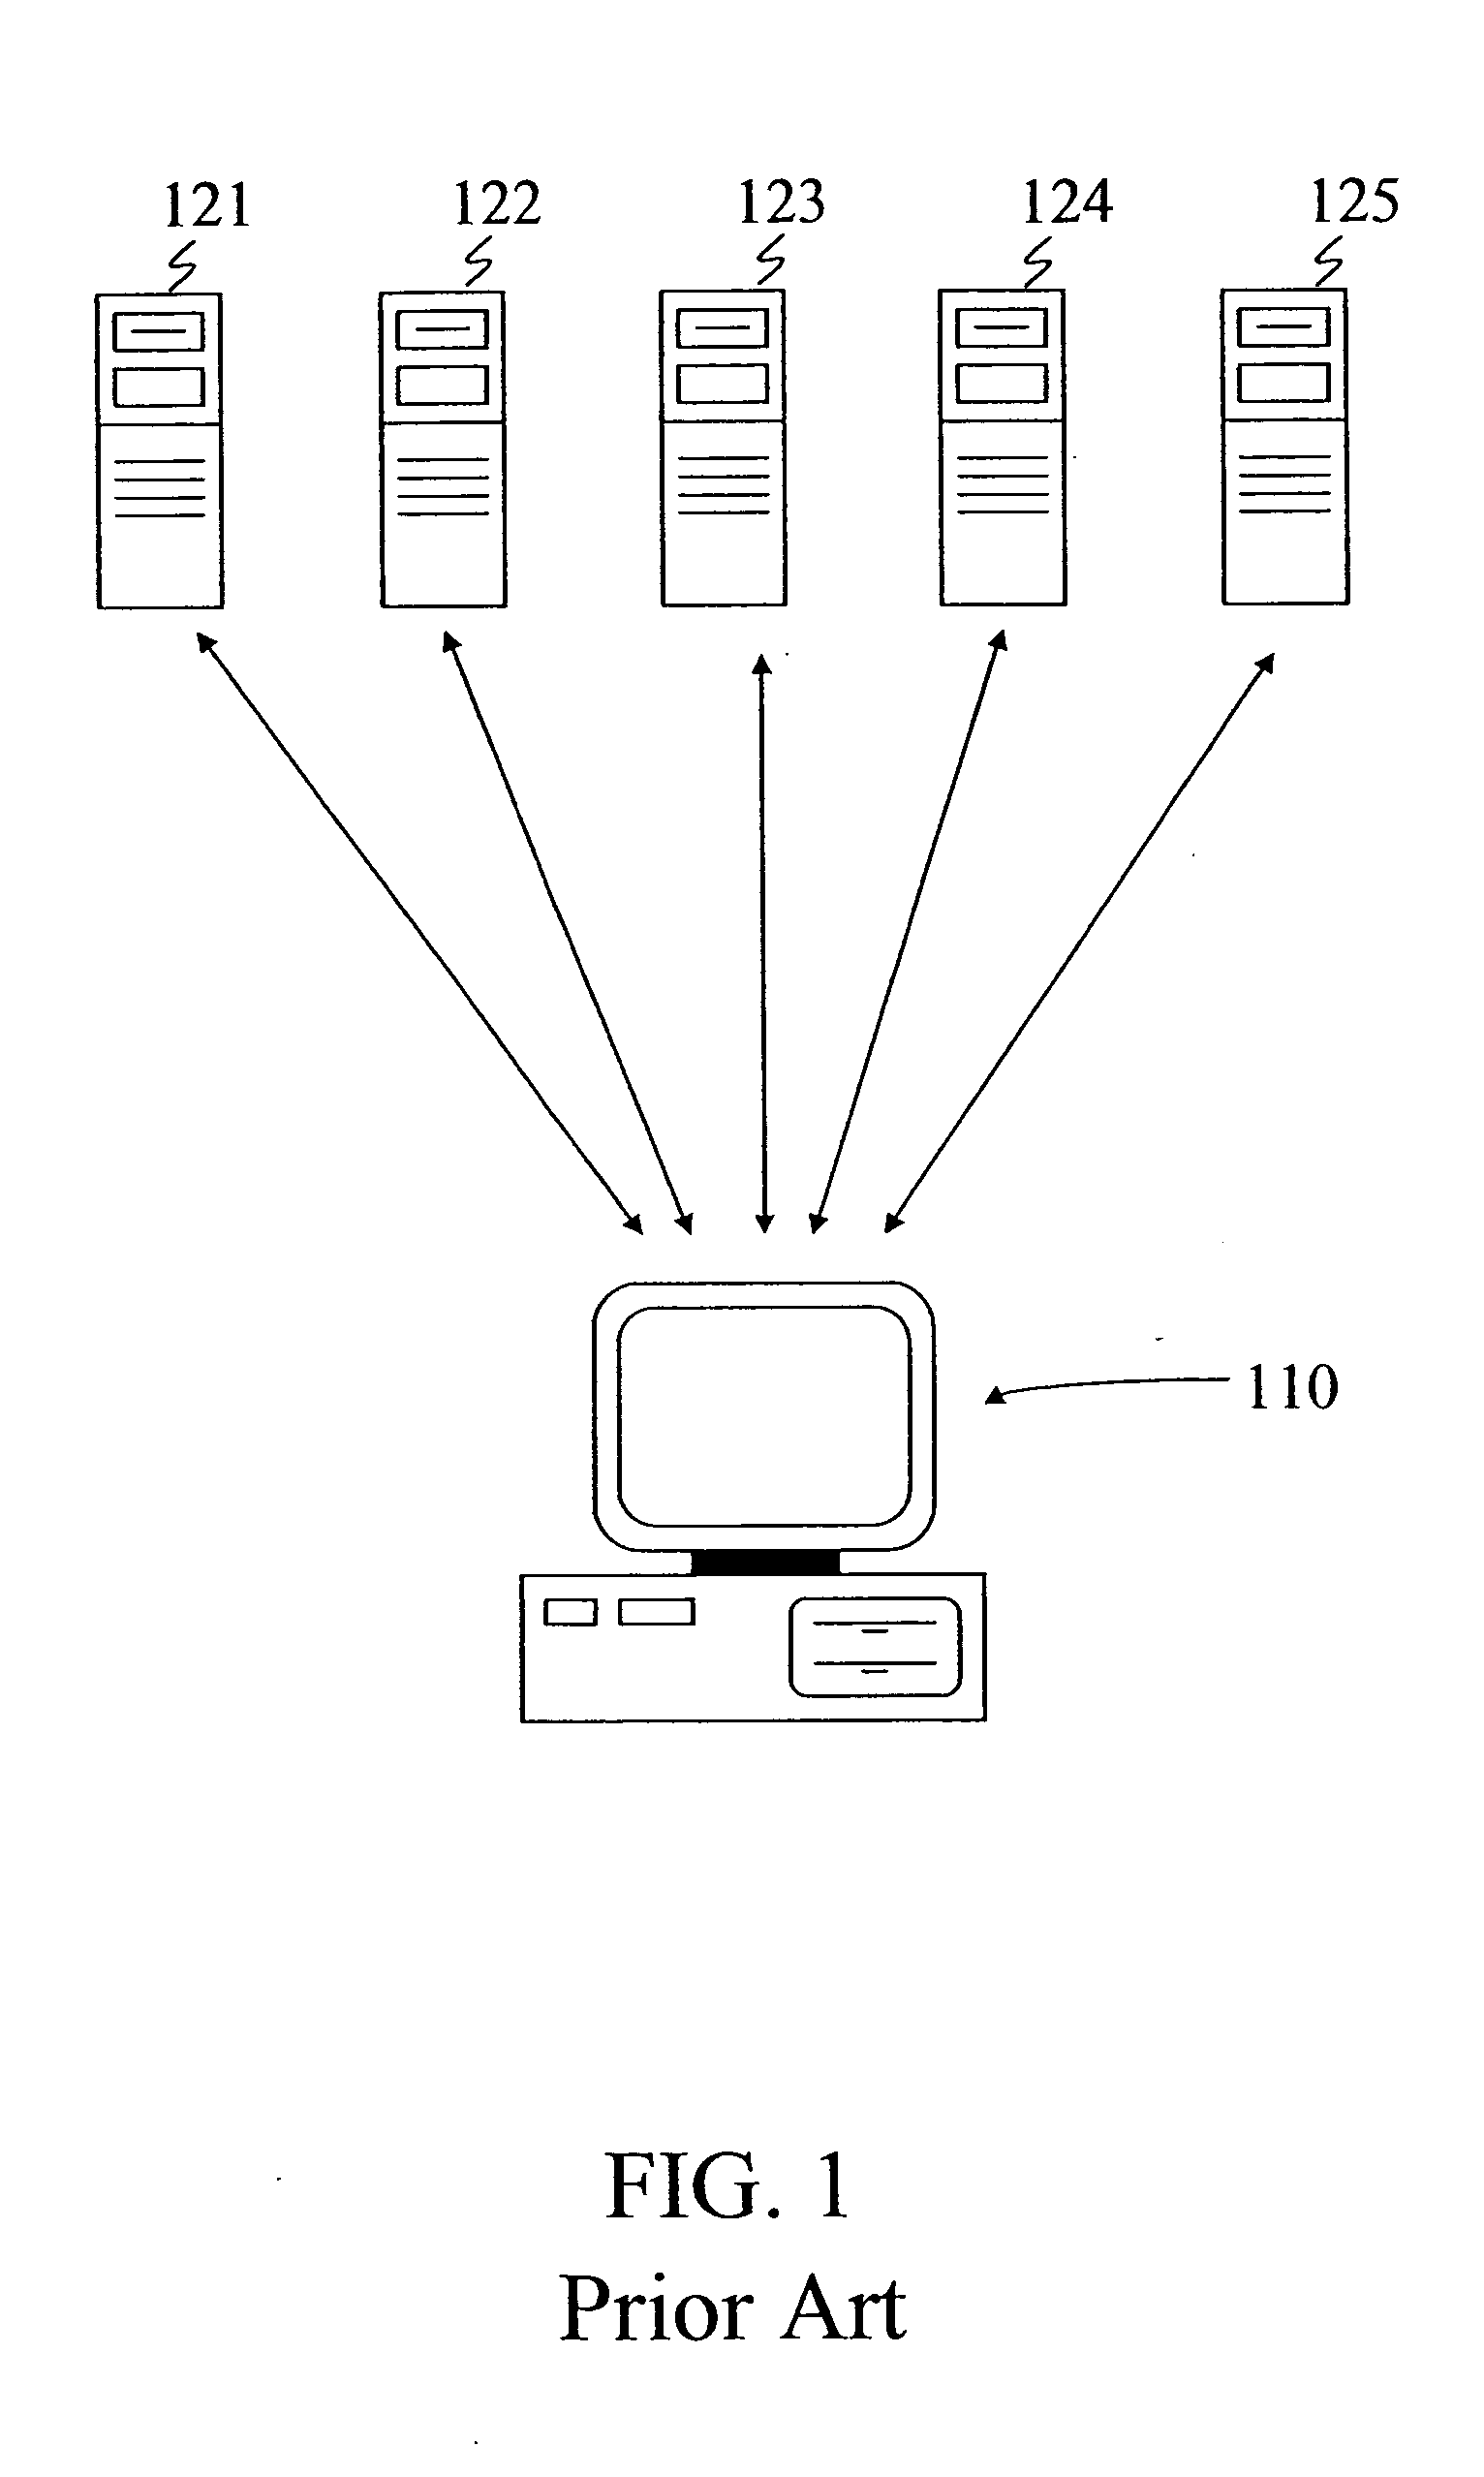 Method and system of implementing recorded data for automating internet interactions